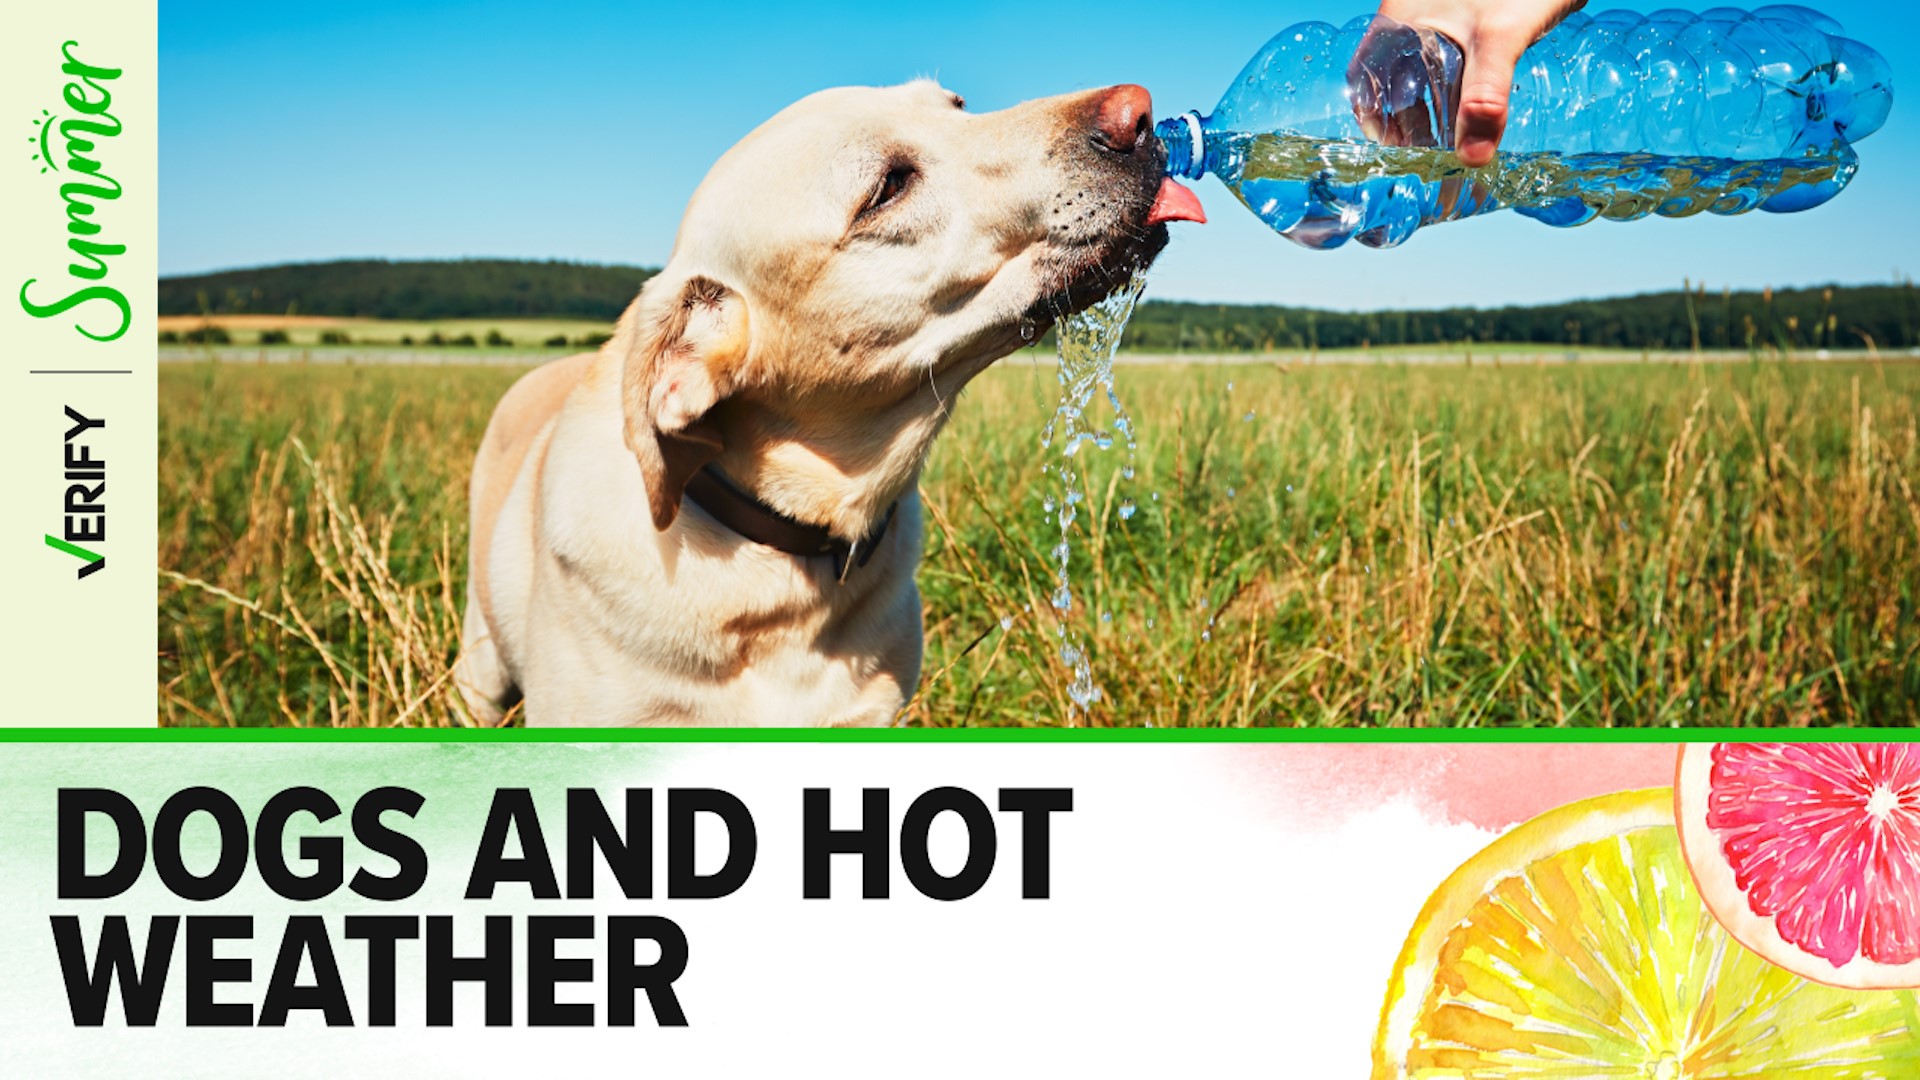 Did you know dogs are terrible at sweating? The primary way they keep cool is through panting. Here are more facts and tips to help your canine manage the heat.